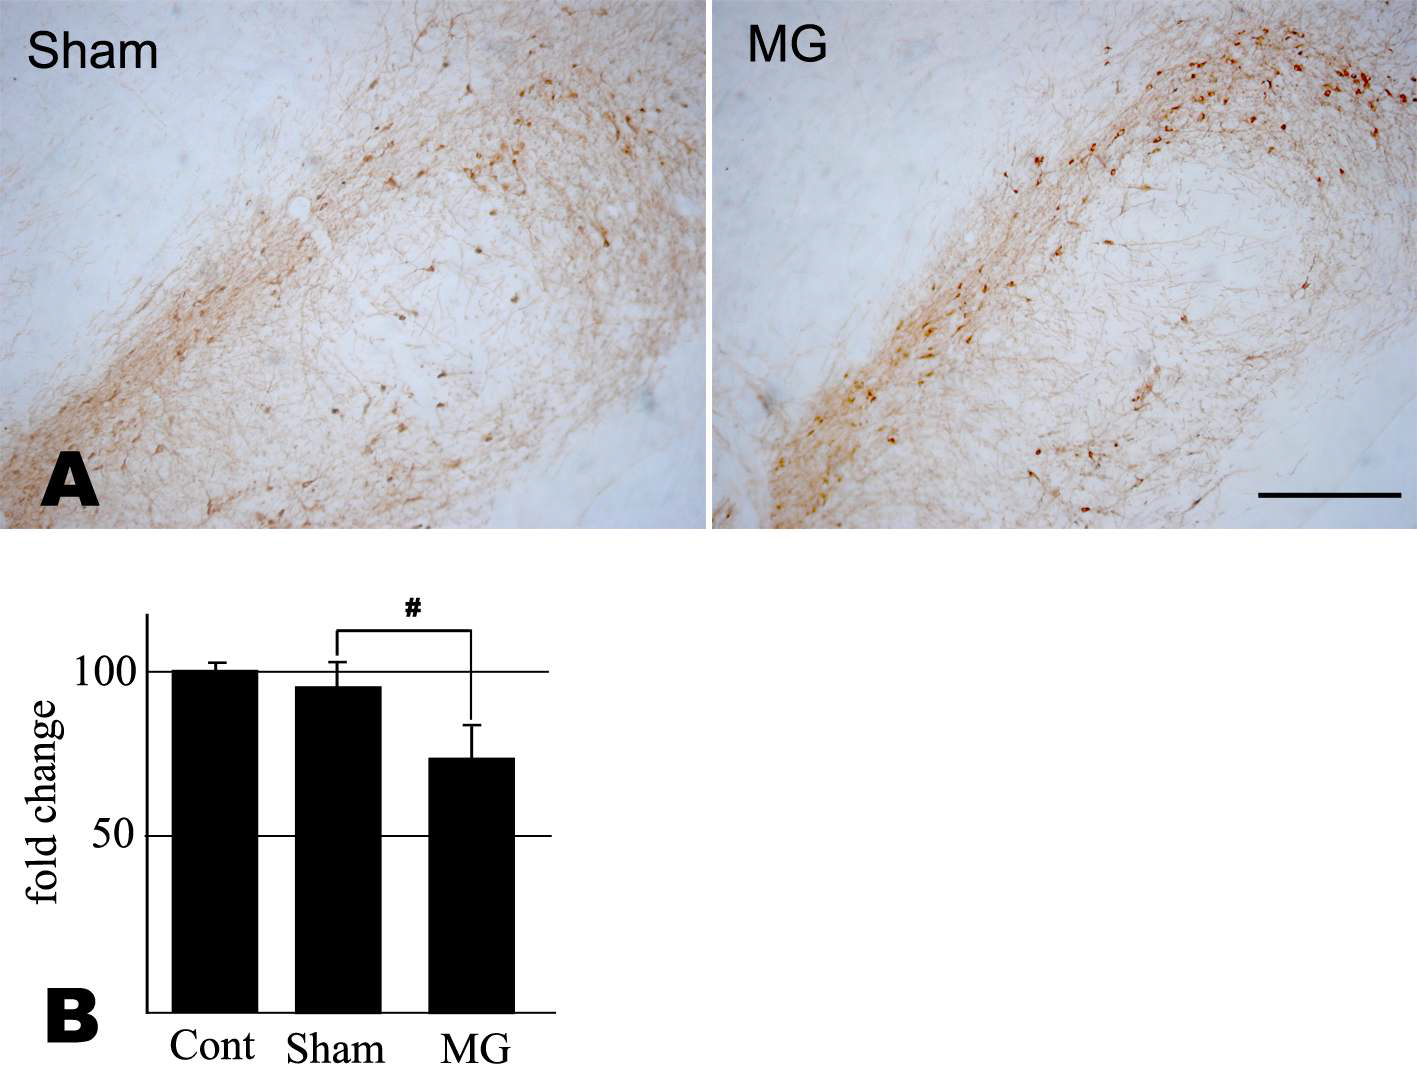 (A) TH immunohistochemistry in the ipsilateral substantia nigra at 14 days after vehicle (Sham) or activated microglia (MG) implantation. Scale bar represent 300 um. (B) Changes in the number of TH immunoreactive neurons in the ipsilateral vehicle or activated microglia implanted SN compared with contralateral SN.